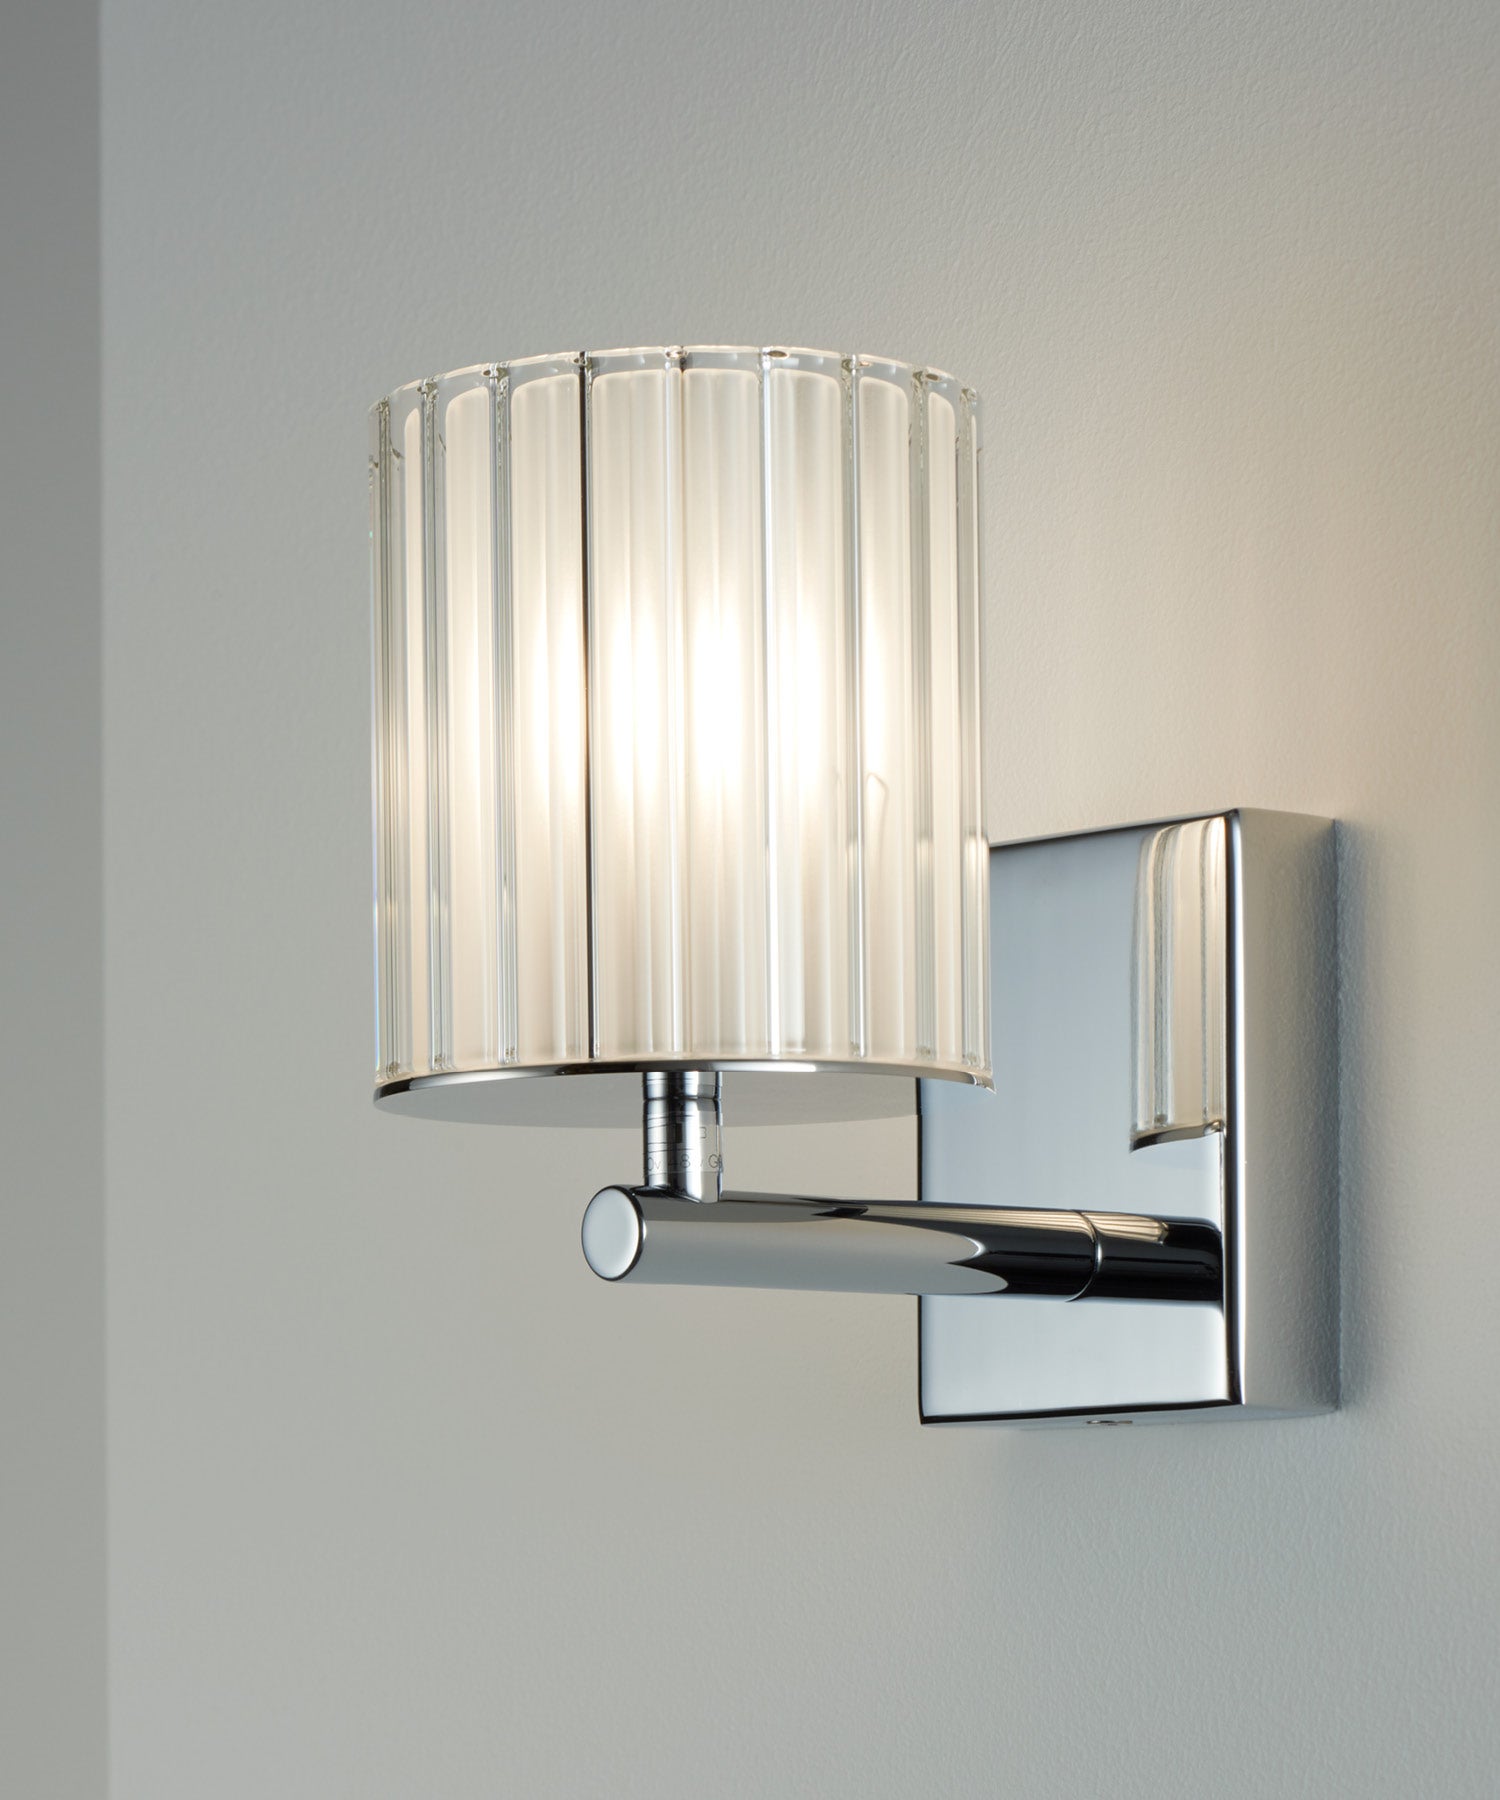 The Flute Wall Lights’ frosted glass diffuser produces a soft, subtle glow that is perfect for a range of applications. It is the ideal accompaniment to the Flute Pendant or Flute Beam Chandelier, working brilliantly to build continuity throughout